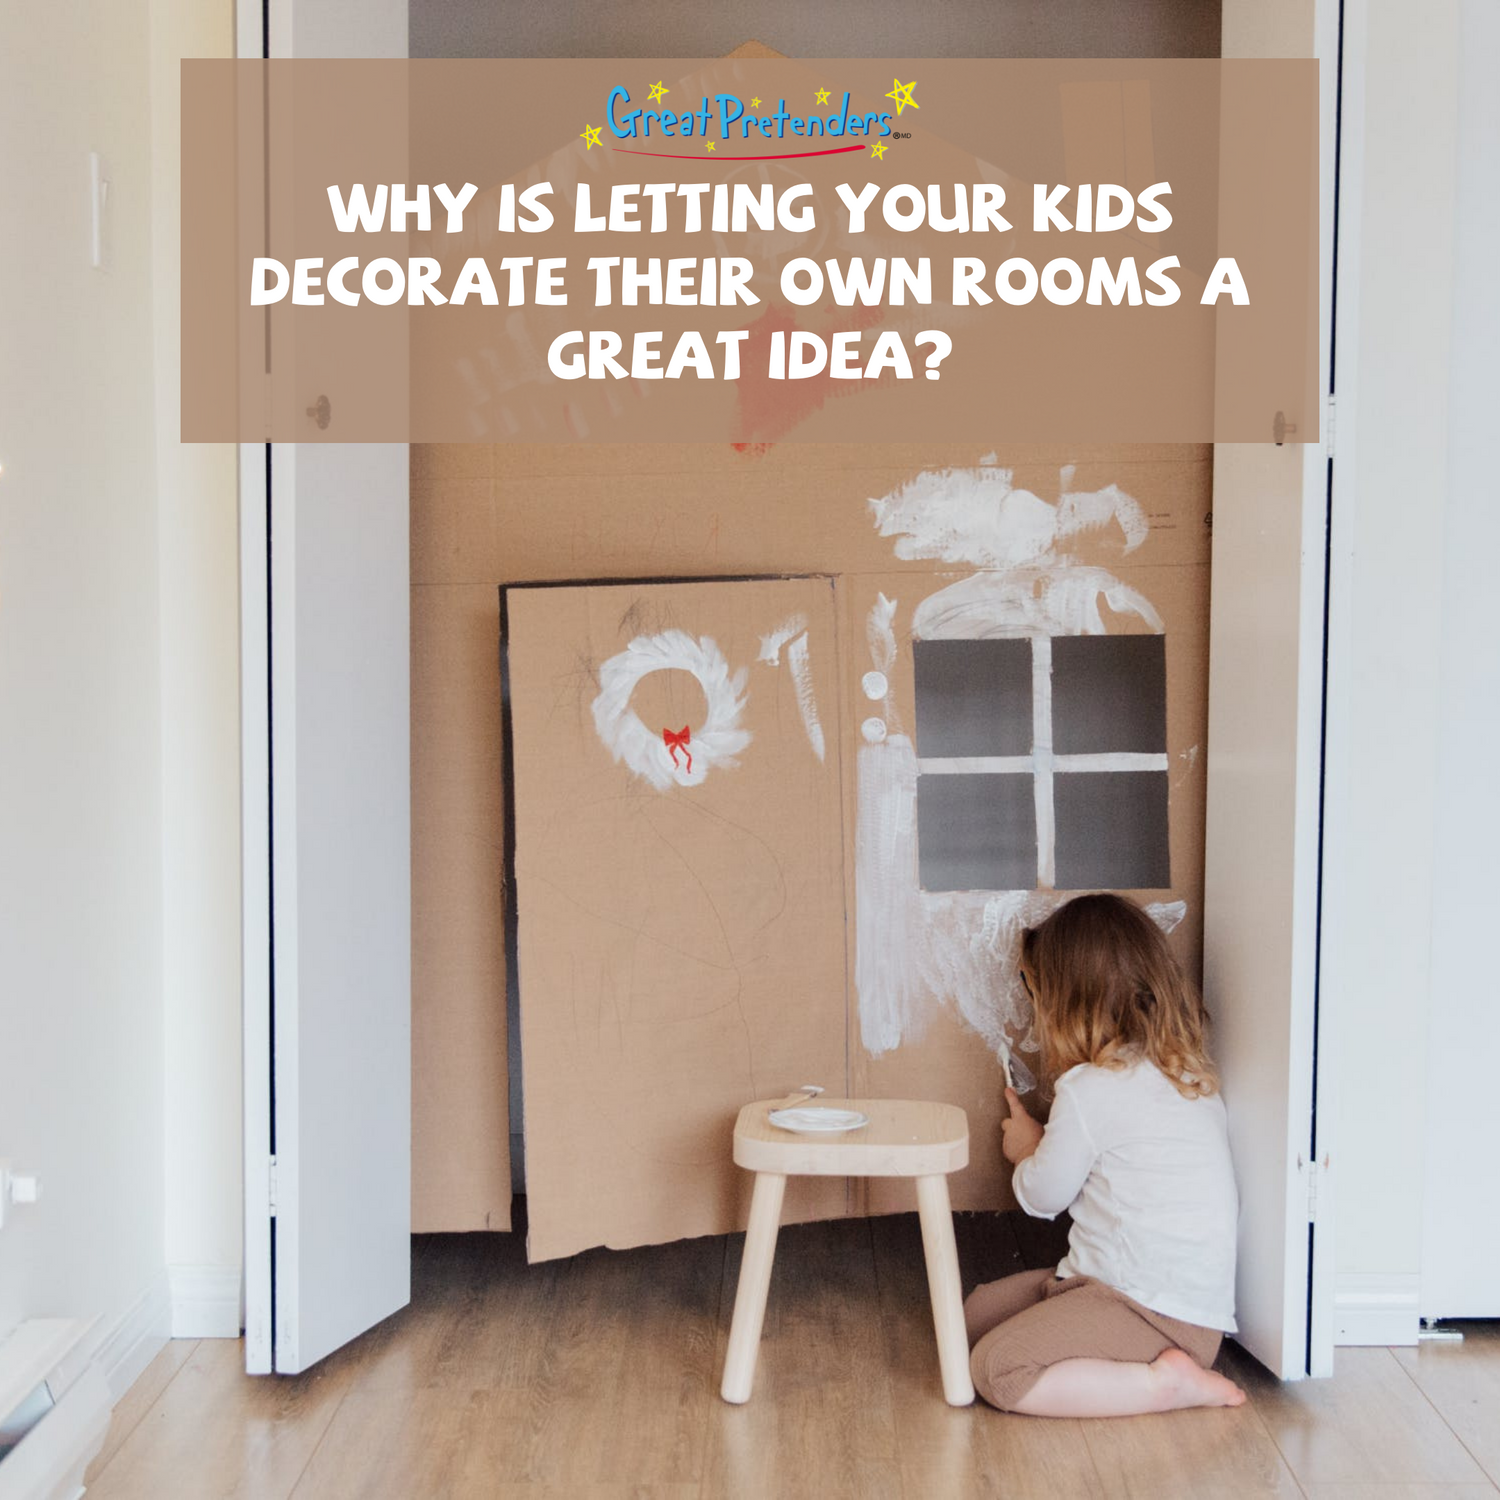 Why Is Letting Your Kids Decorate Their Own Rooms a Great Idea?